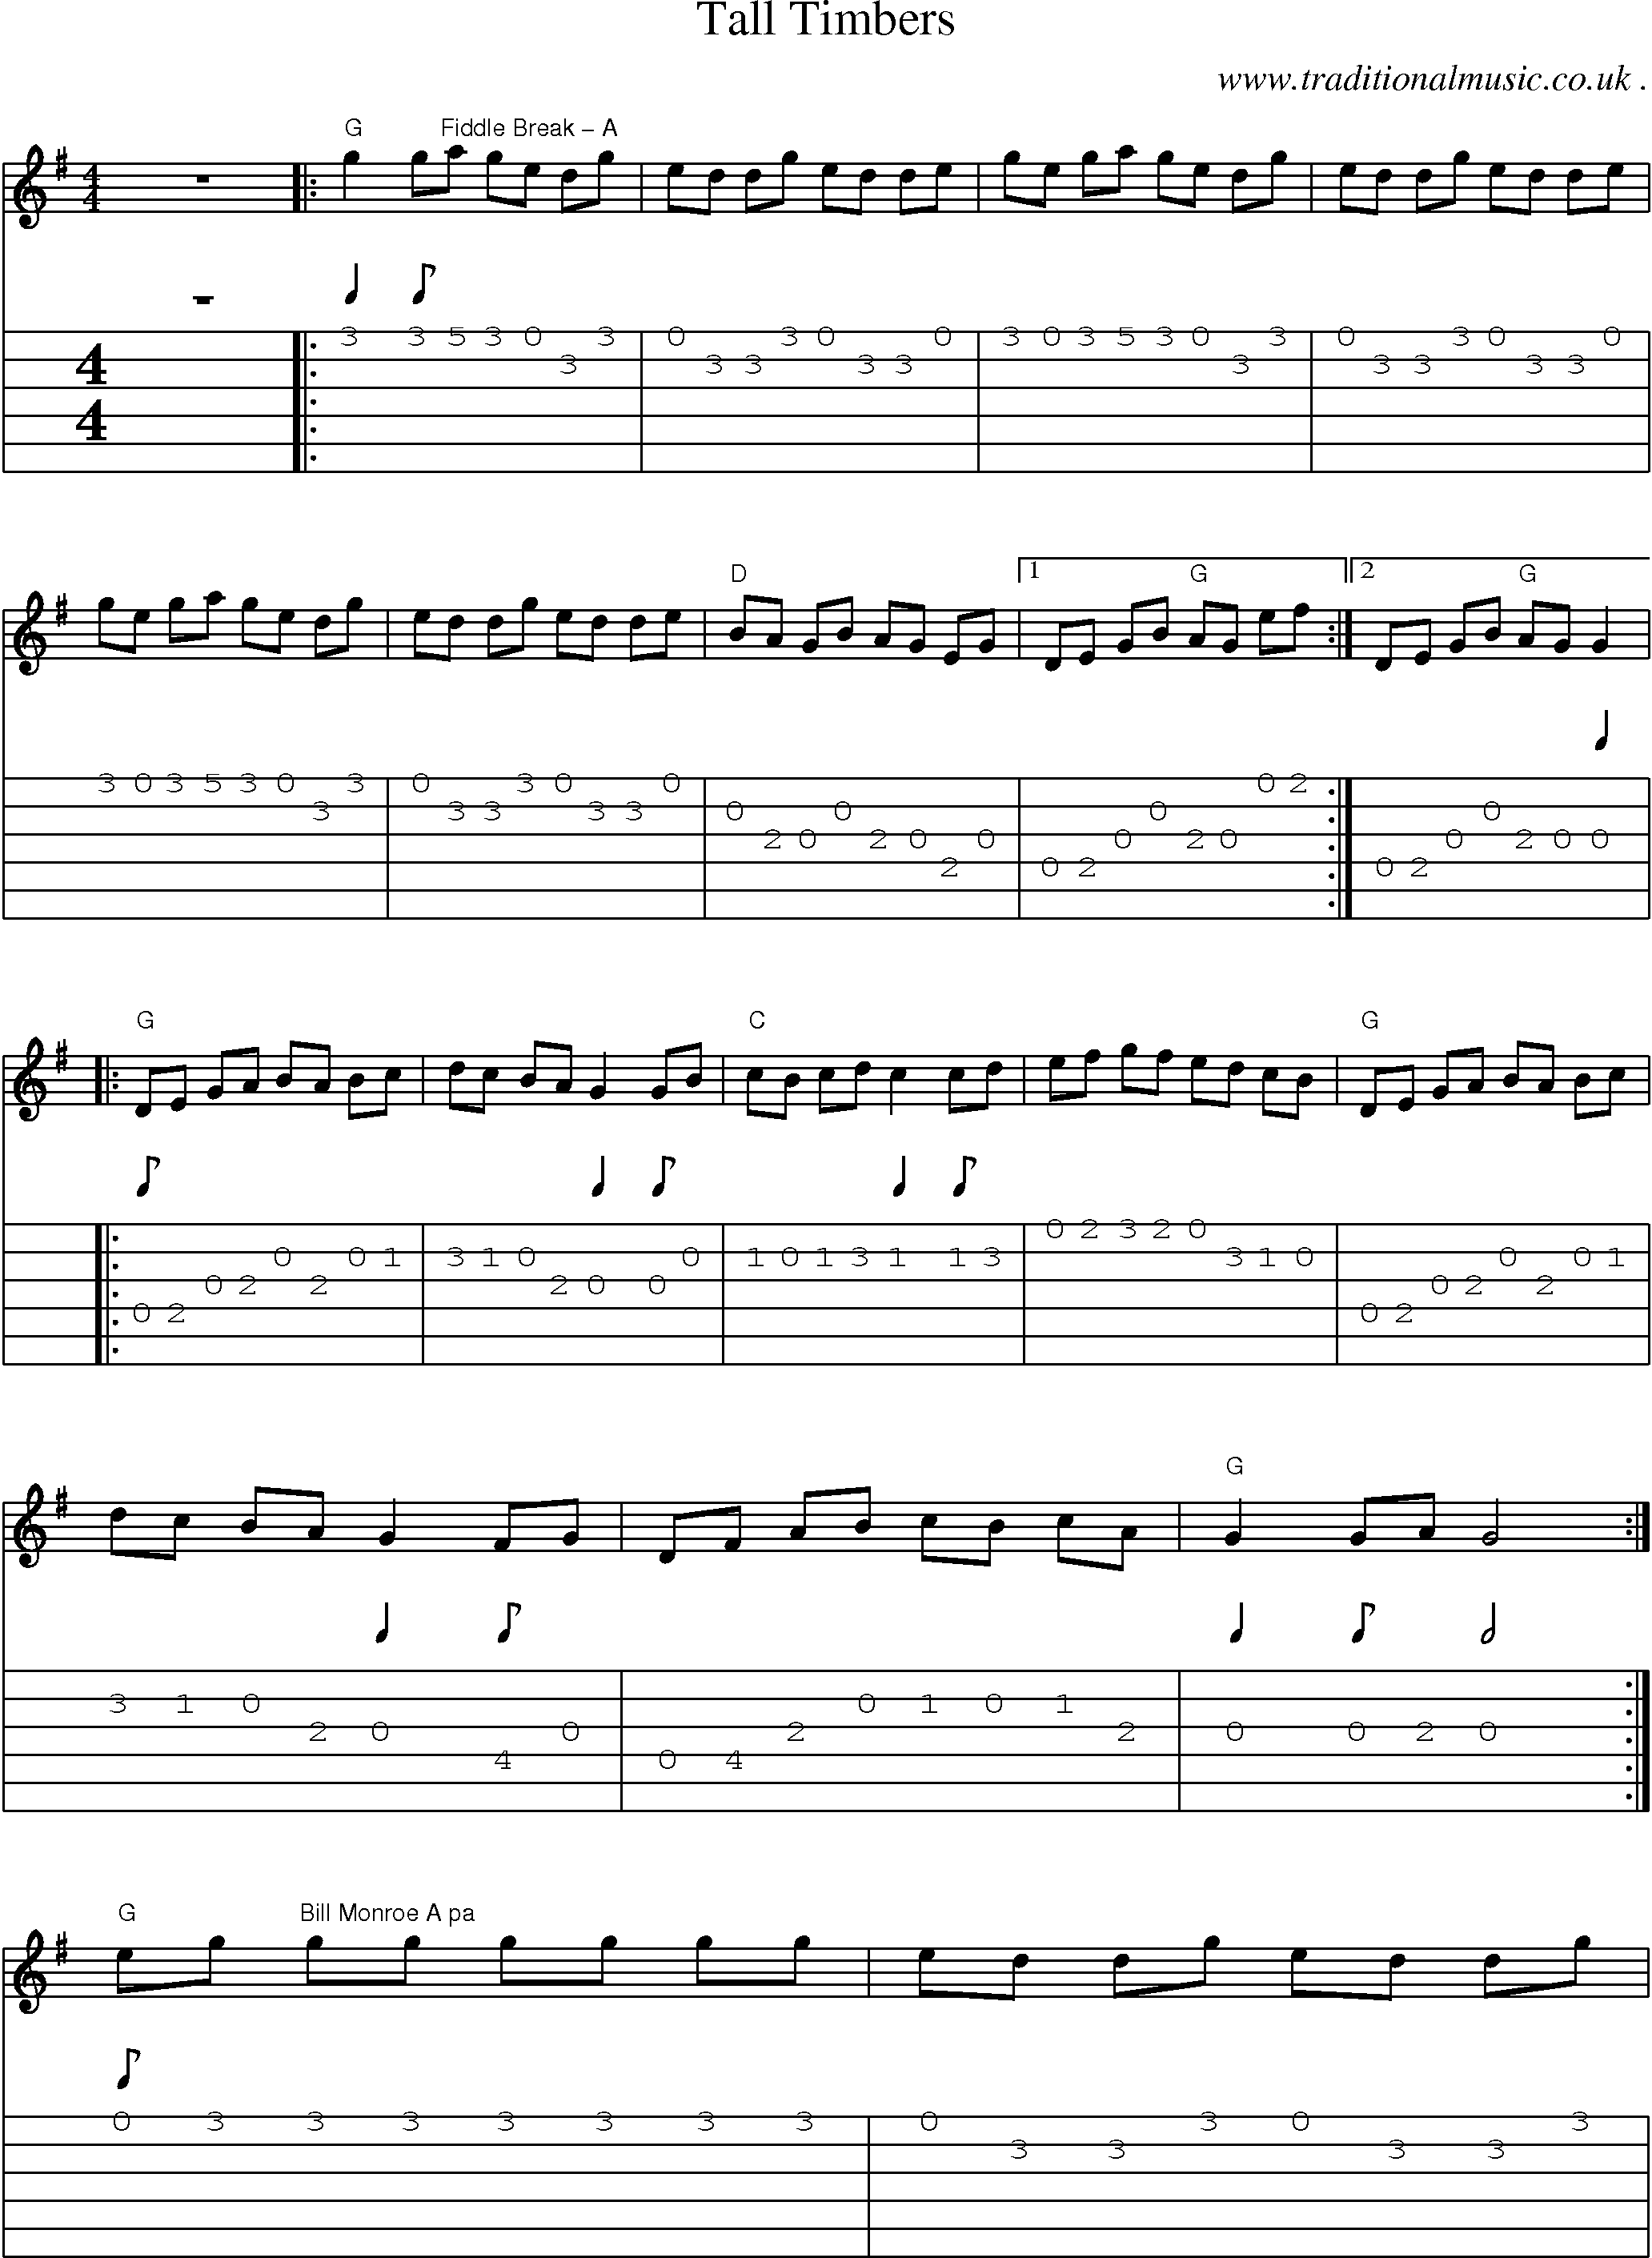 Music Score and Guitar Tabs for Tall Timbers